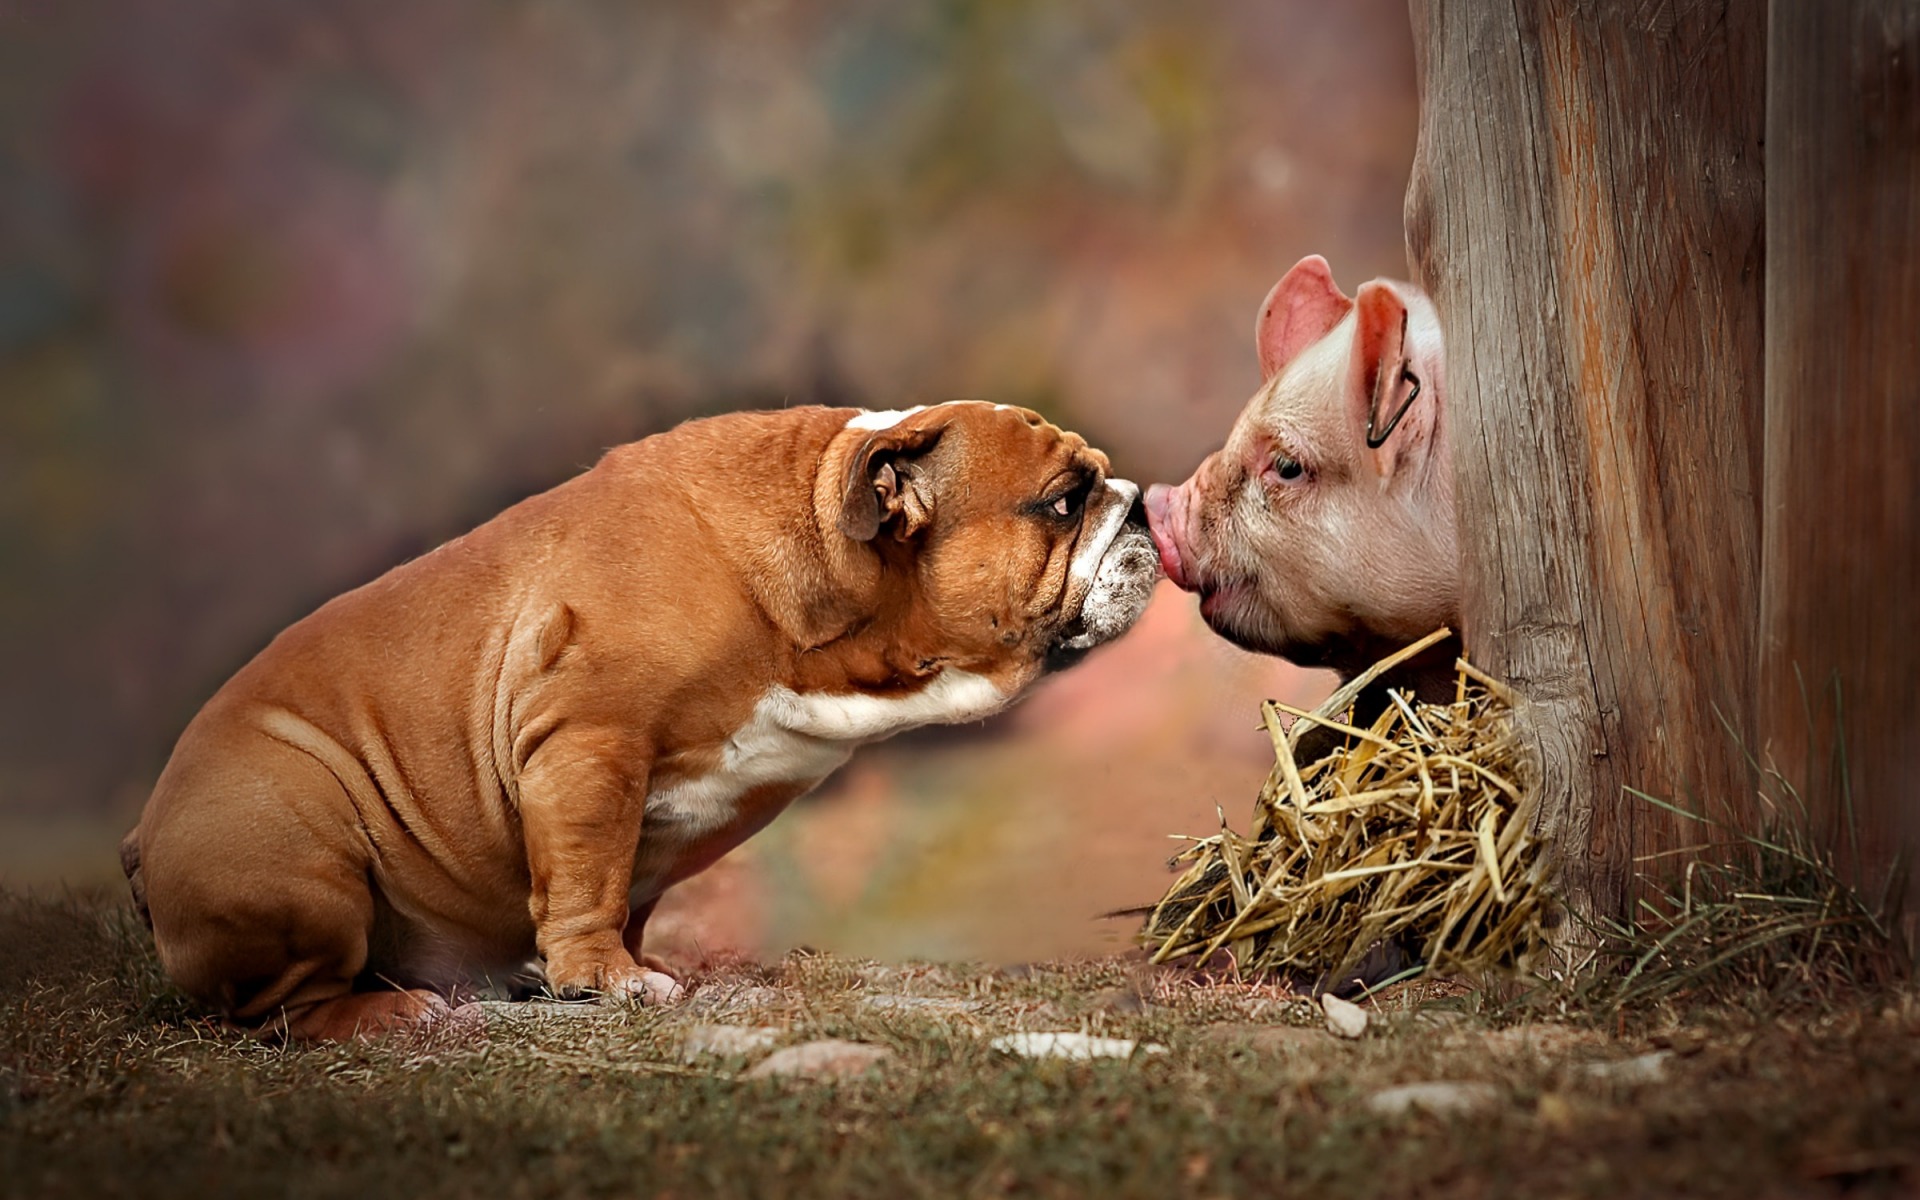 Download wallpapers American Bulldog, Piglet, Farm, Friendship Concepts, Fat Dog, Dog and Pig for desktop with resolution 1920x1200. High Quality HD pictures wallpapers